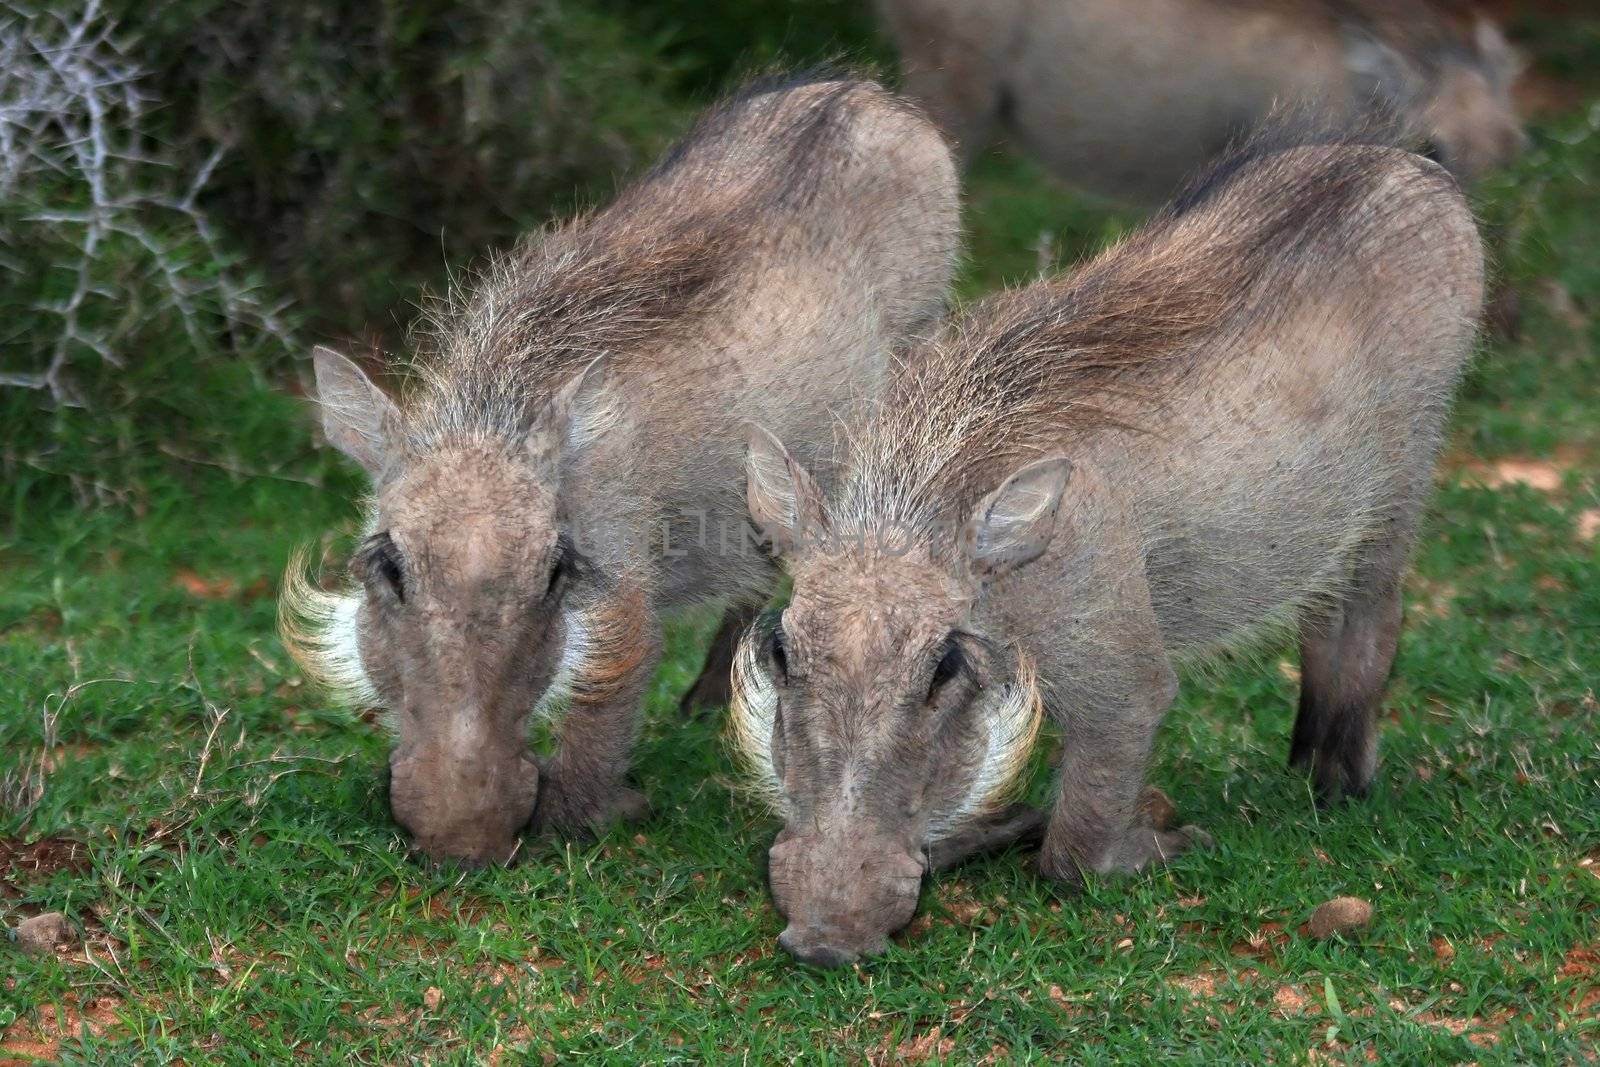 Two warthogs on their knees grazing on green grass